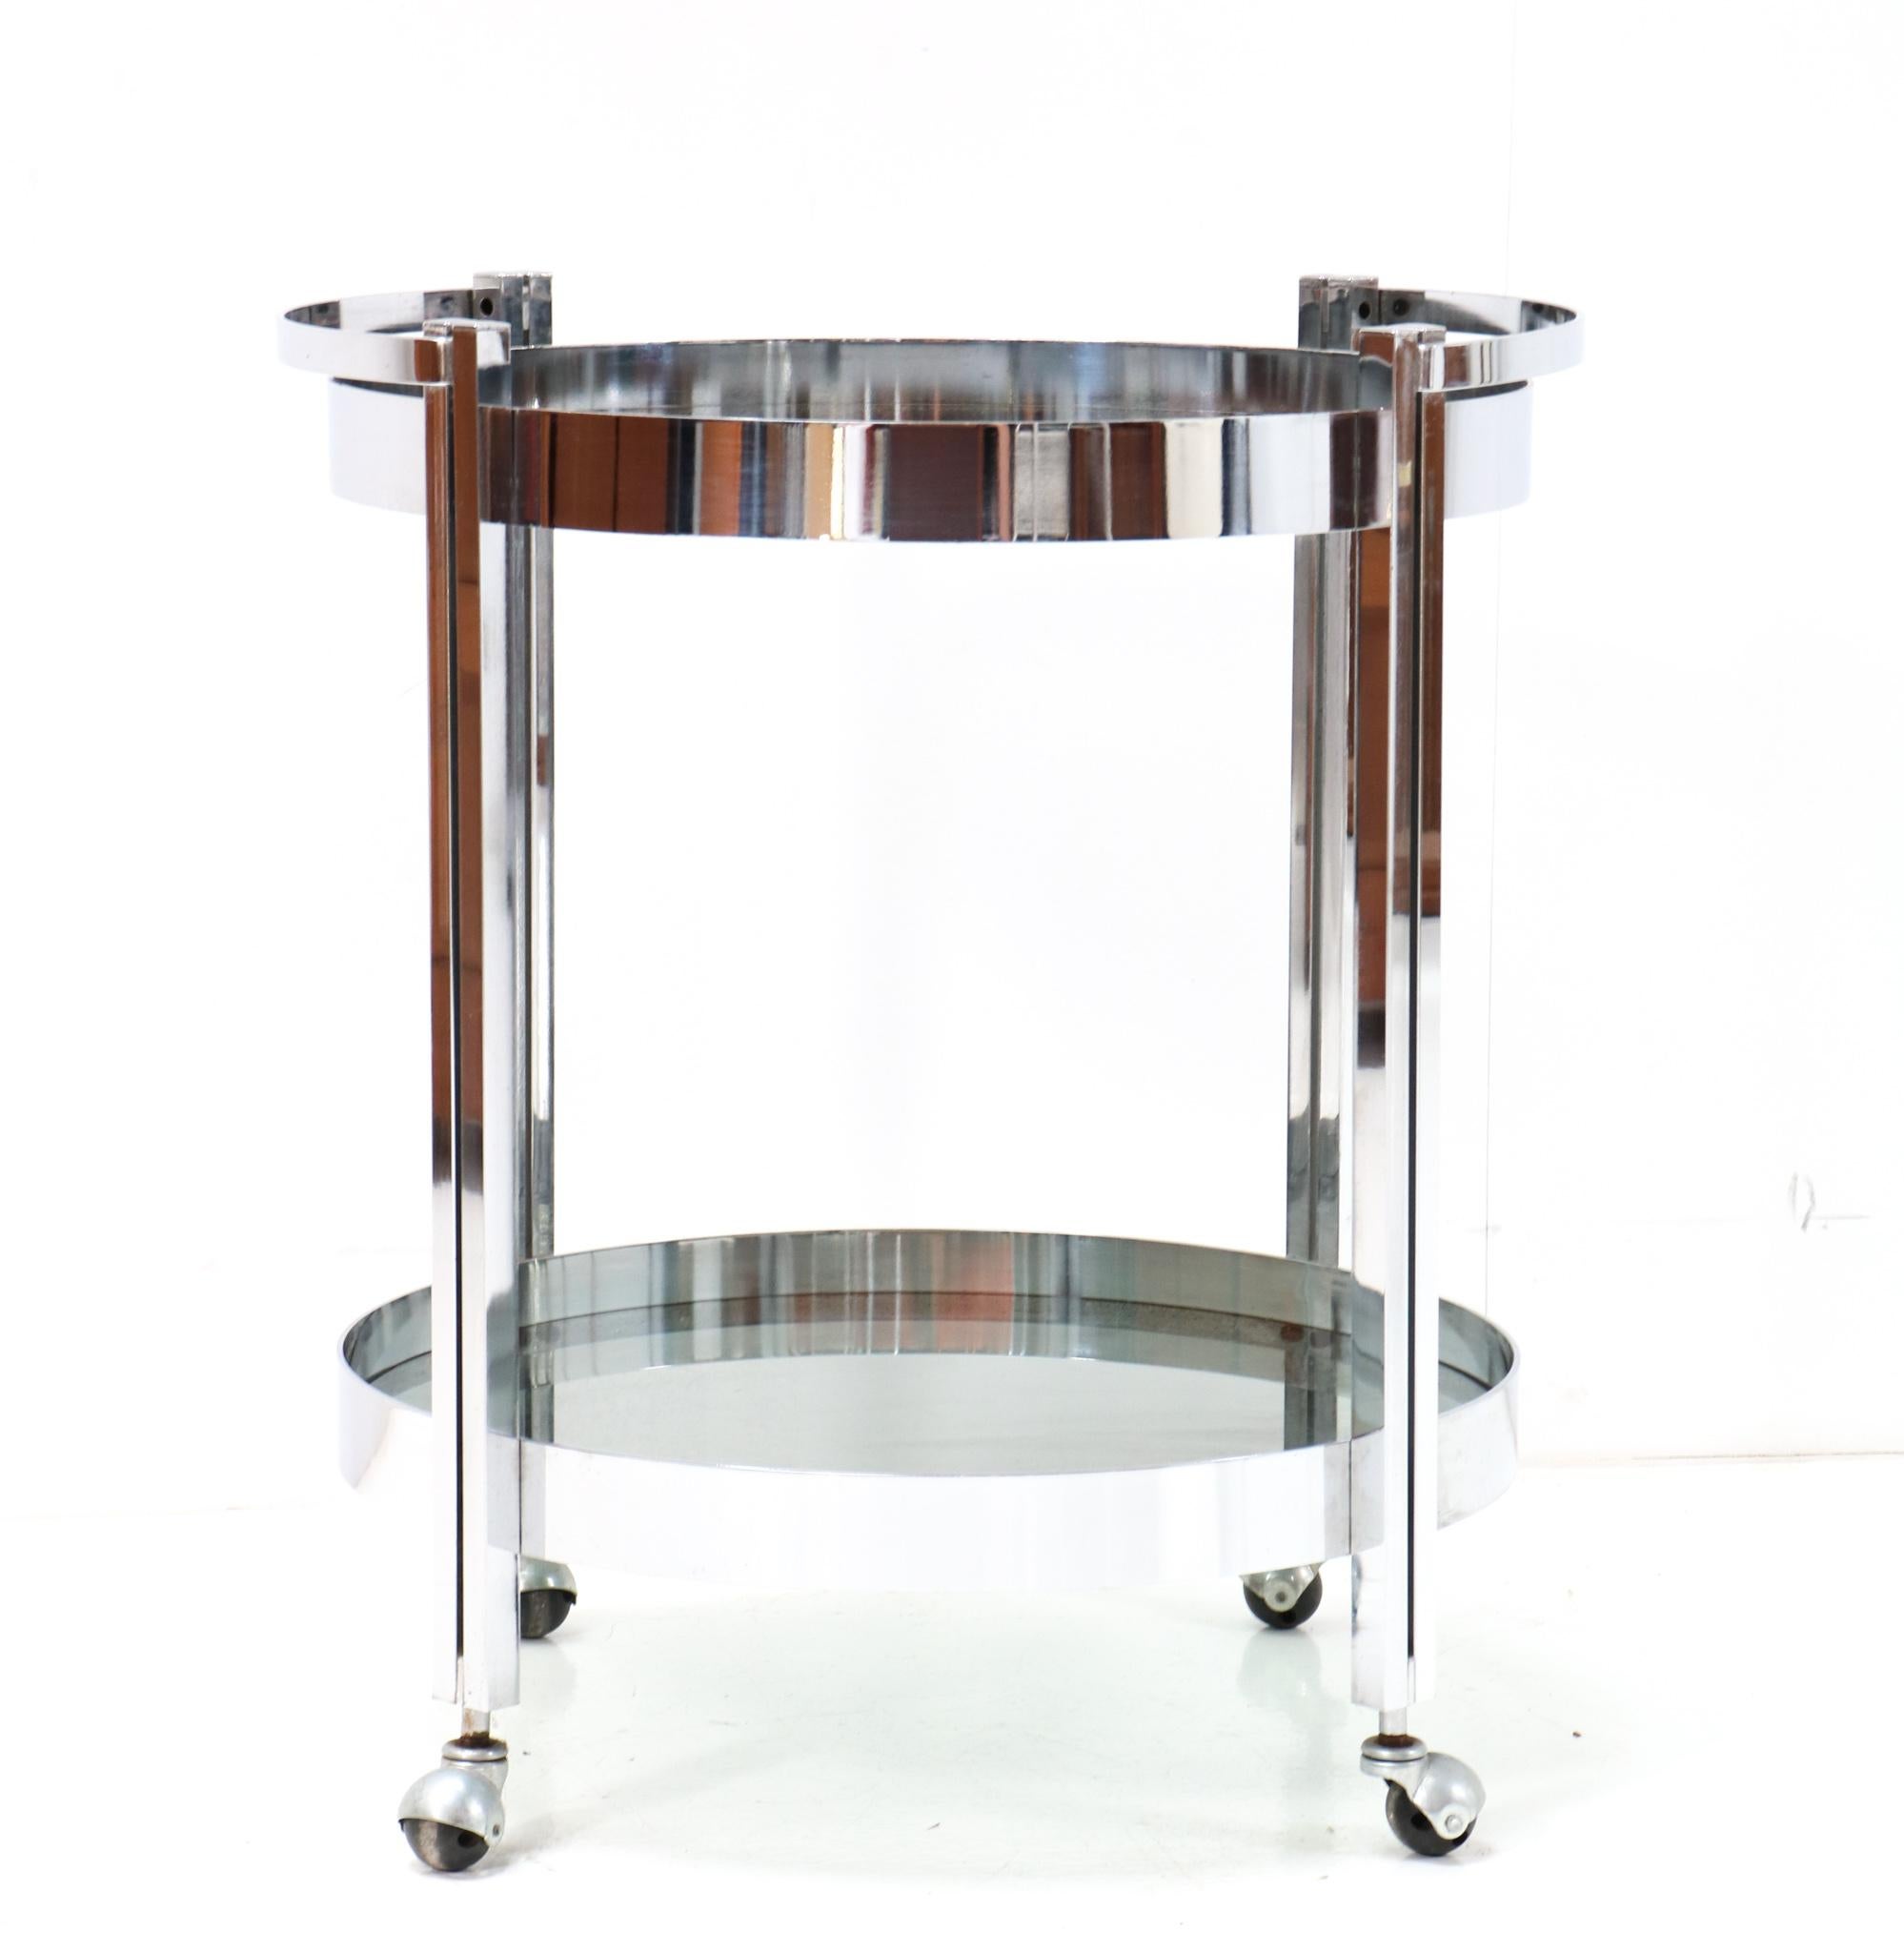 Funky Mid-Century Modern bar cart or trolley.
Striking French design from the 1970s.
Chrome plated metal frame with two original smoked glass tops.
This wonderful Mid-Century Modern bar cart or trolley is in good condition with
minor wear